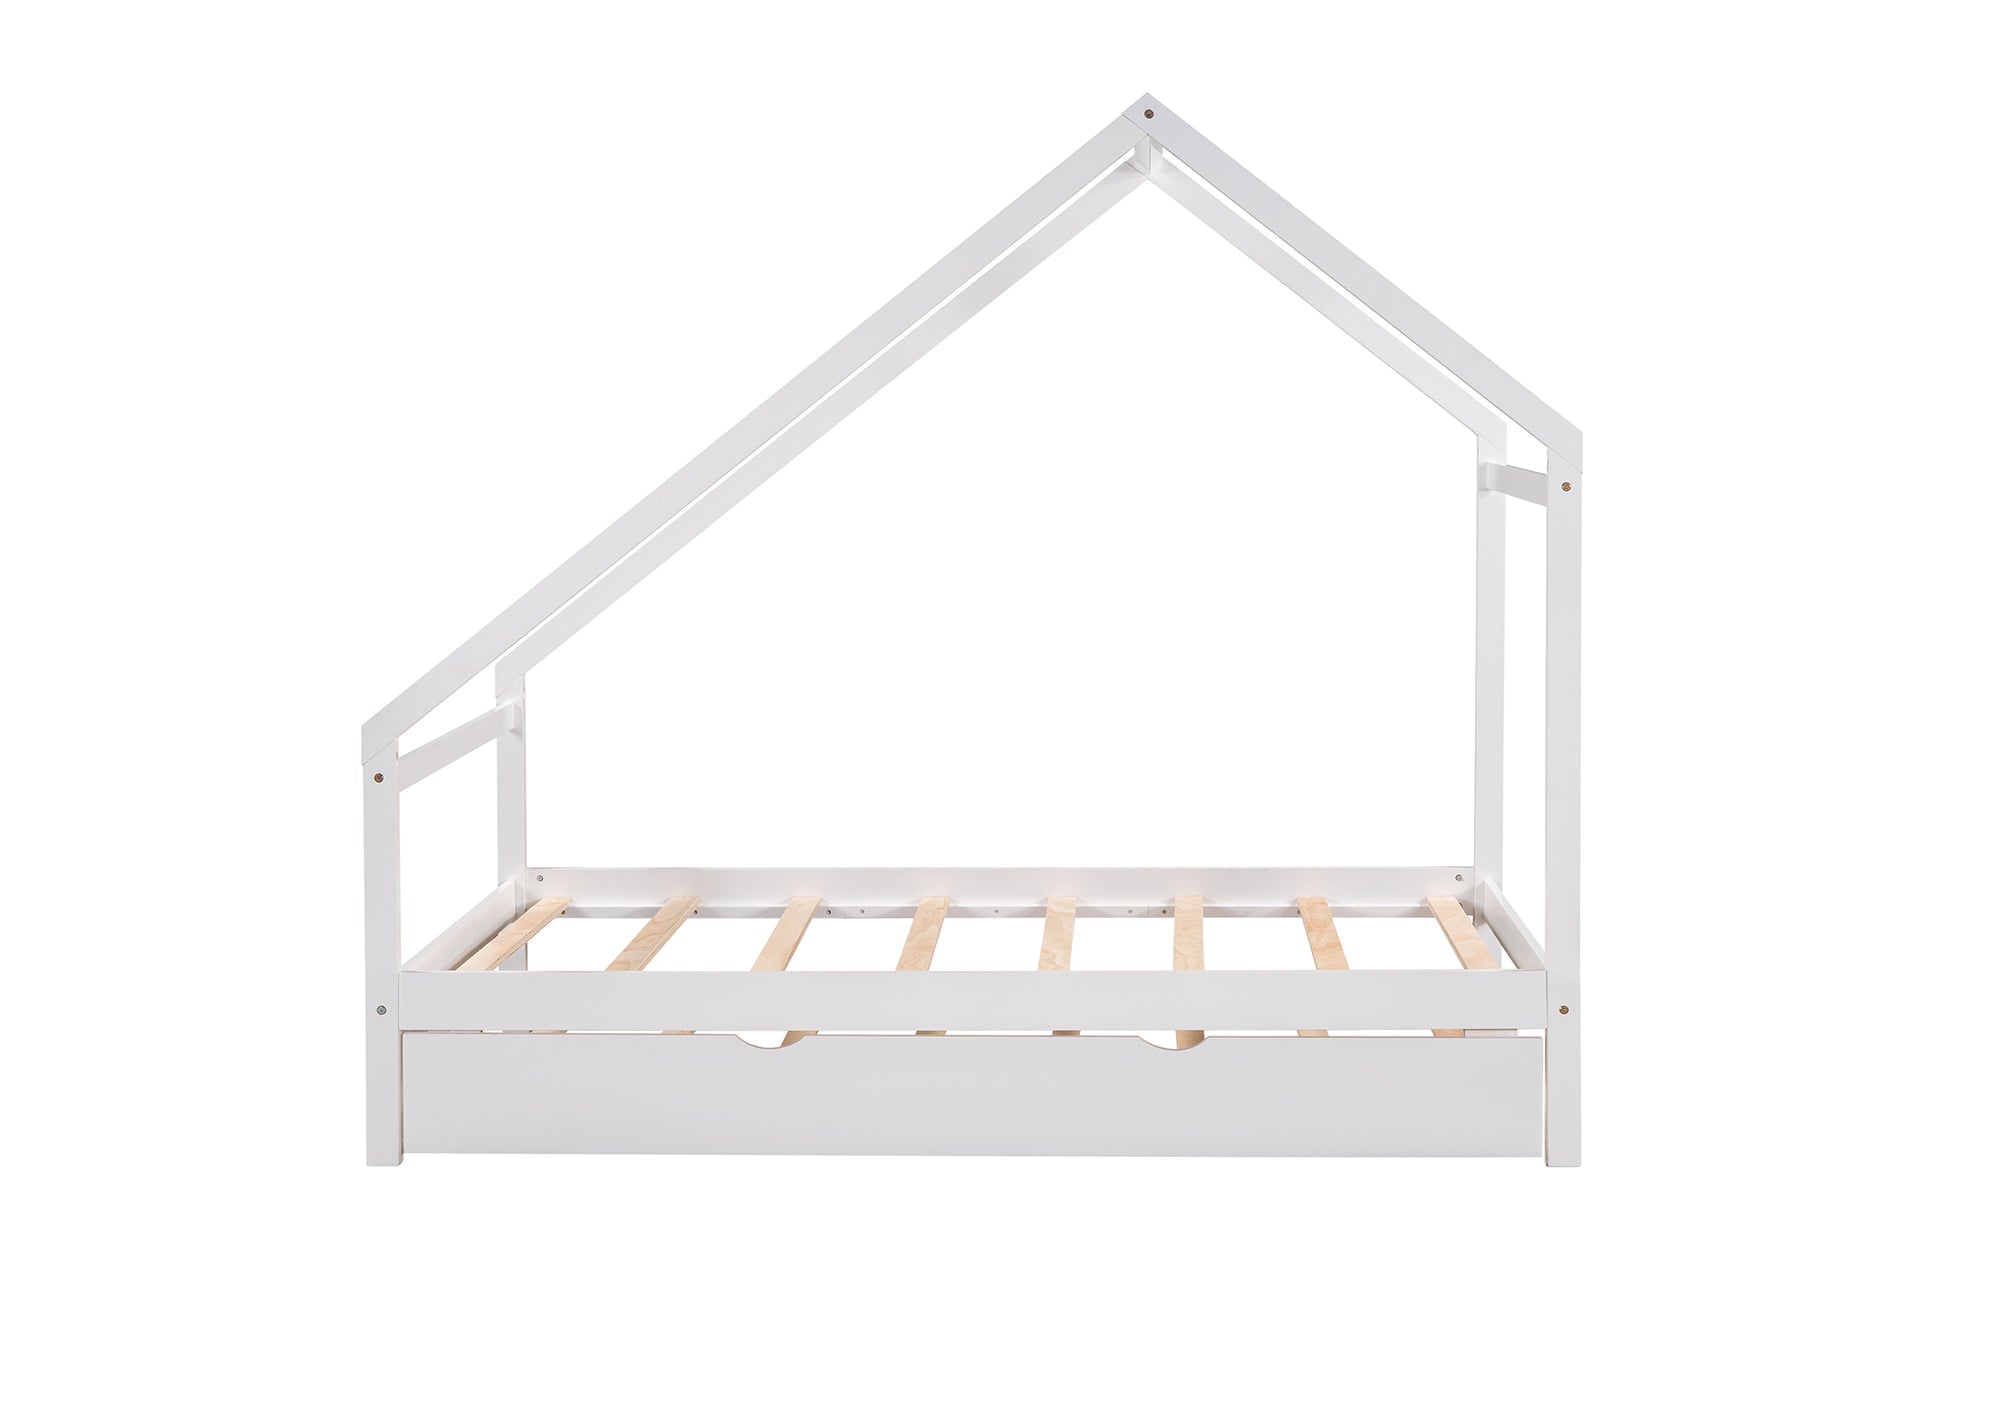 Twin House Bed with Twin Trundle, Wood Floor House Bed Frame for Kids, Boys and Girls, No Box Spring Required, White